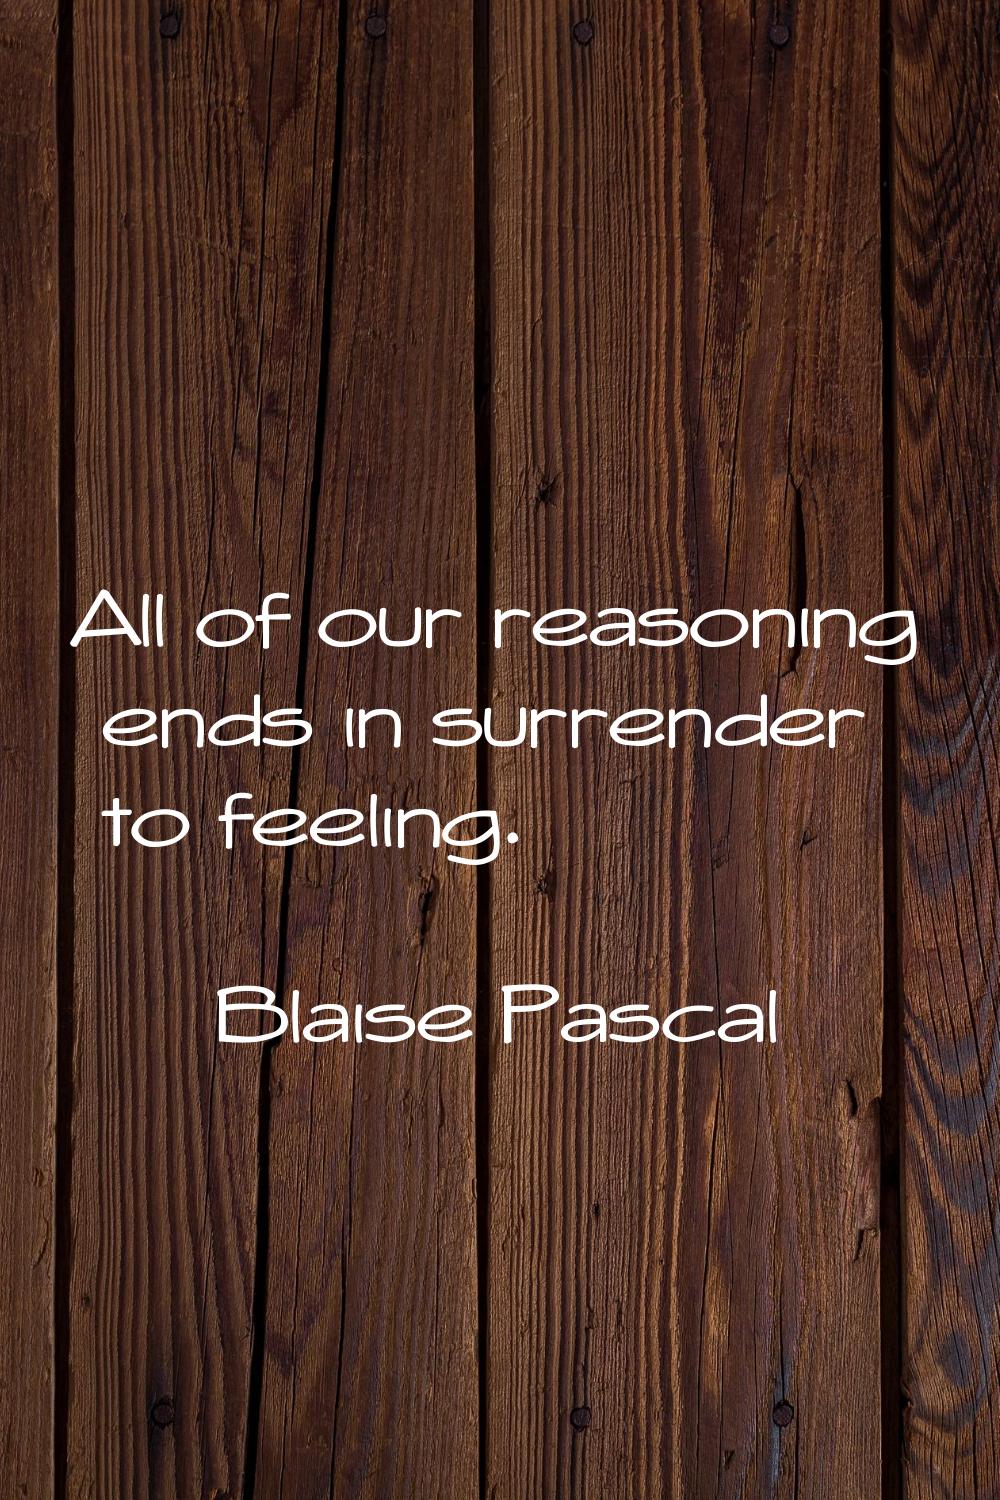 All of our reasoning ends in surrender to feeling.